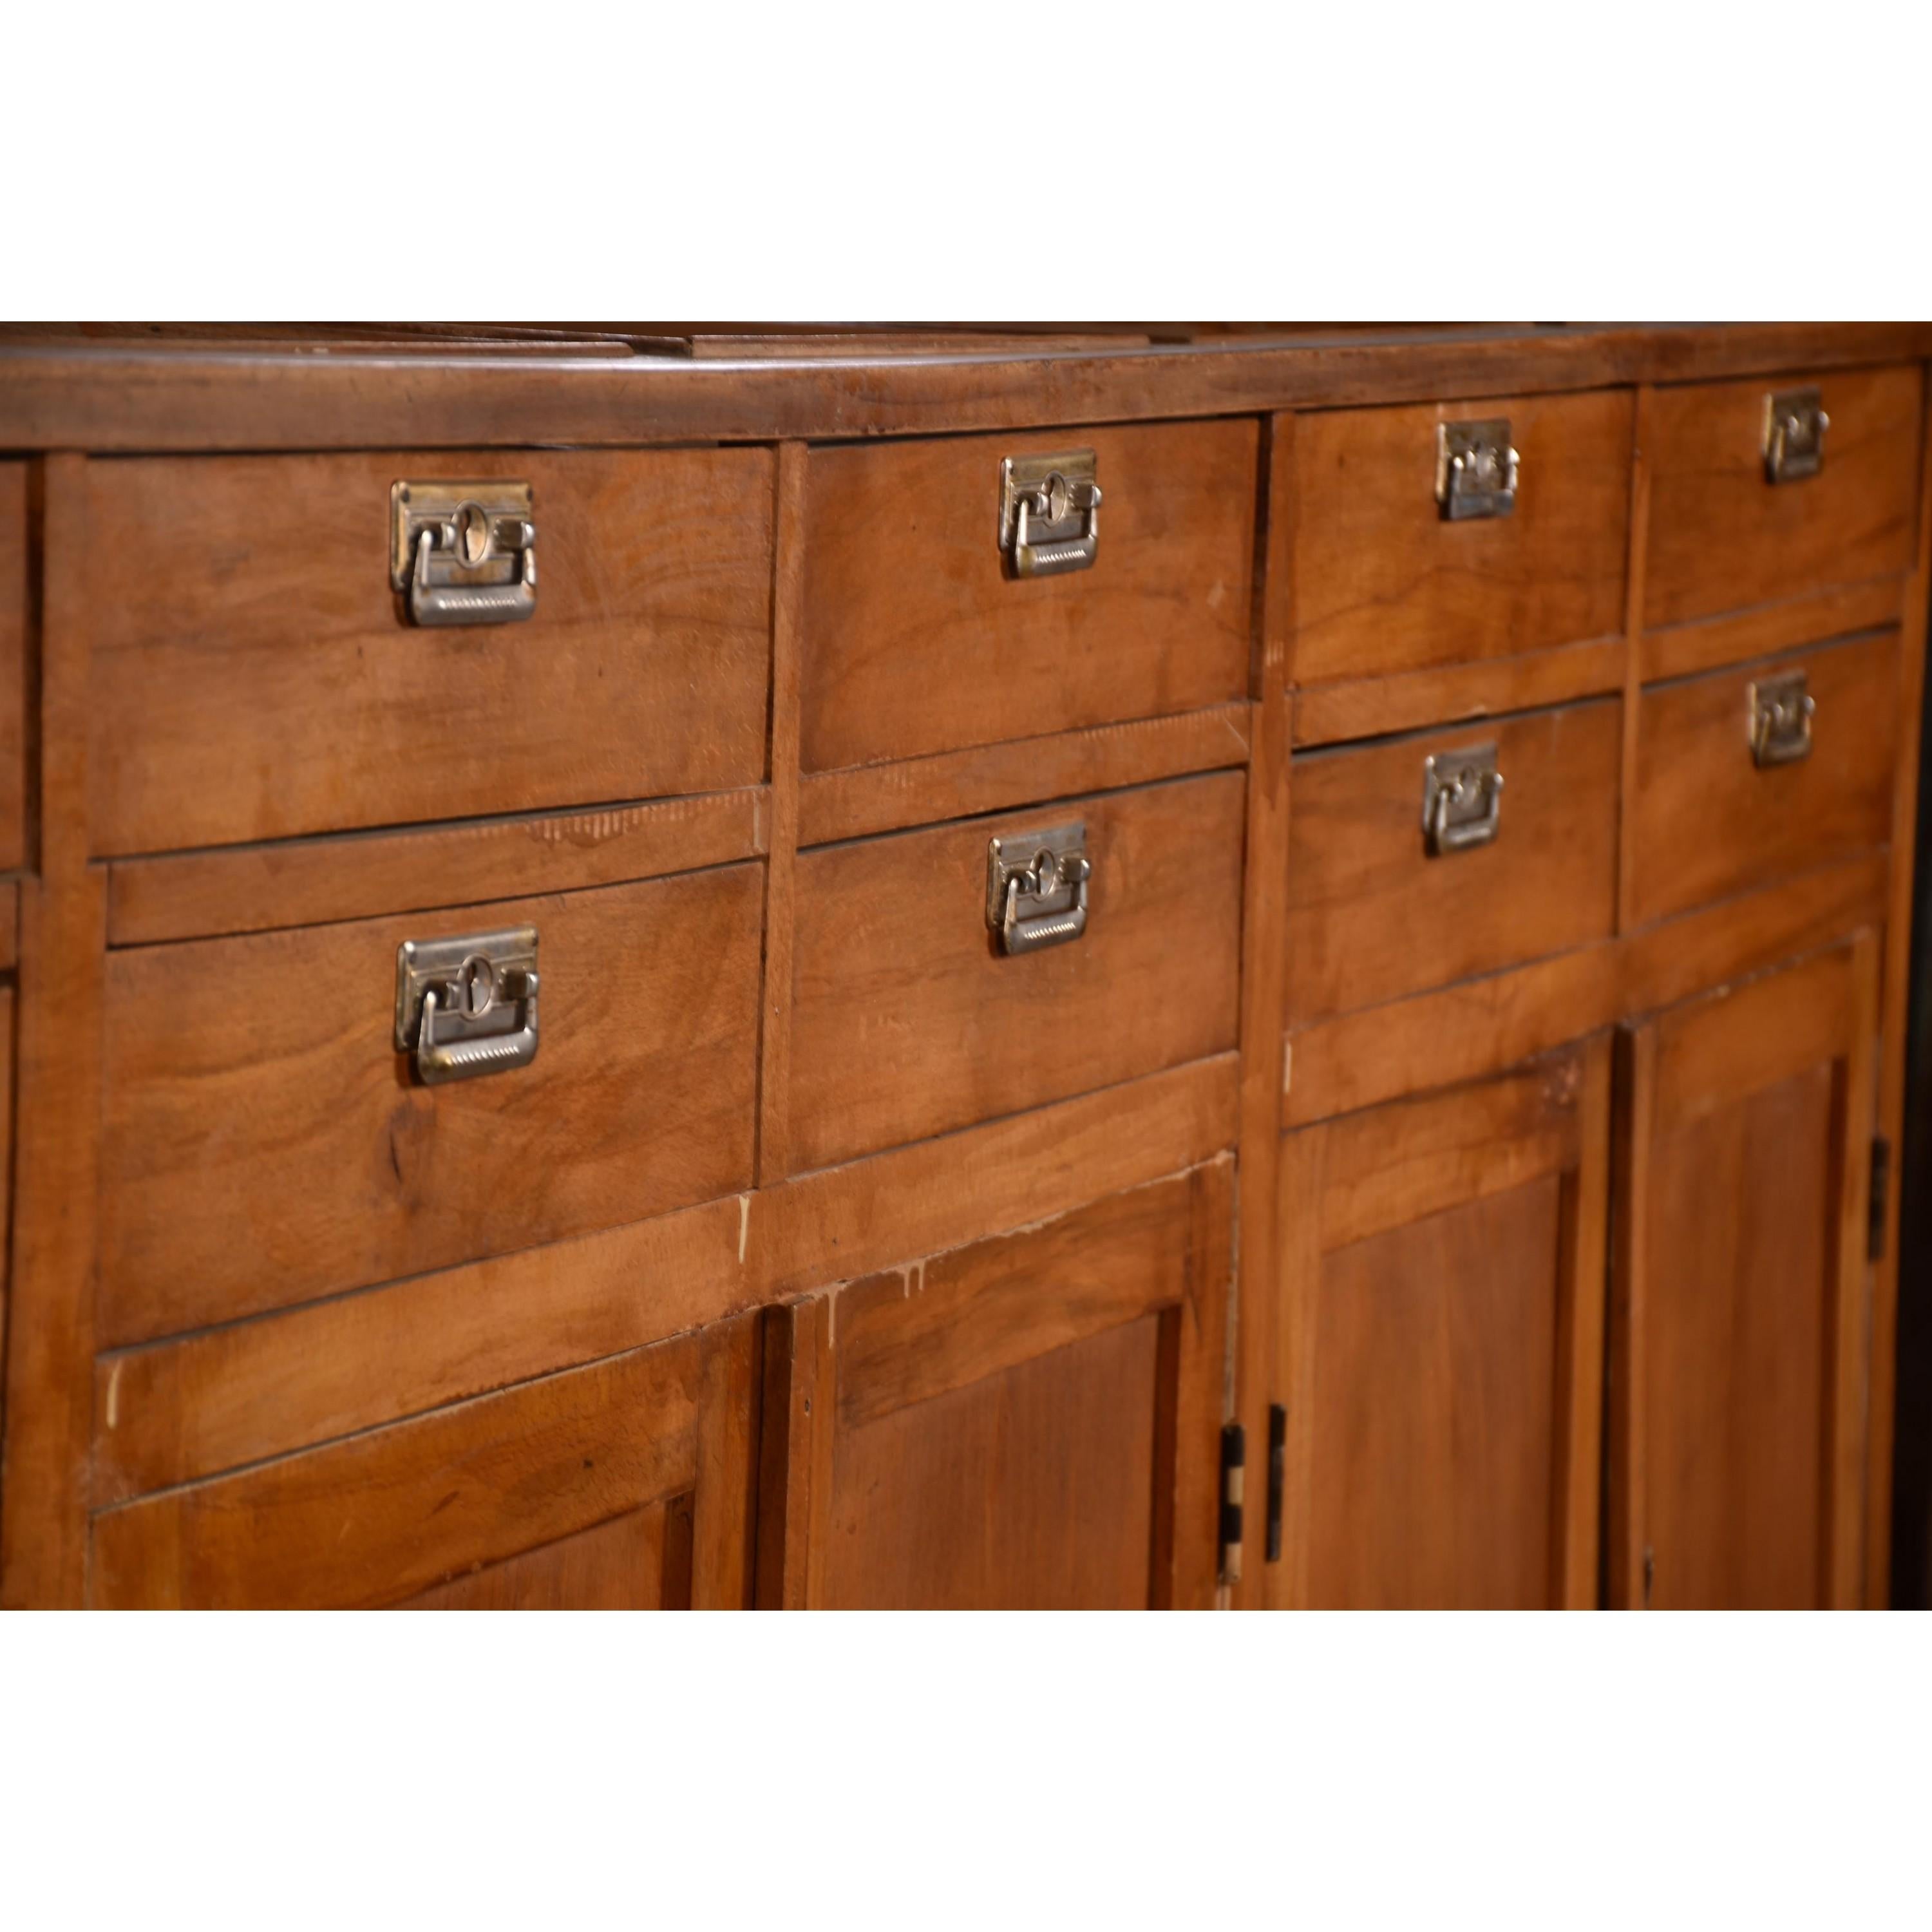 Apothecary Haberdashery Display Counter Sideboard circa 1930s Number 13 1